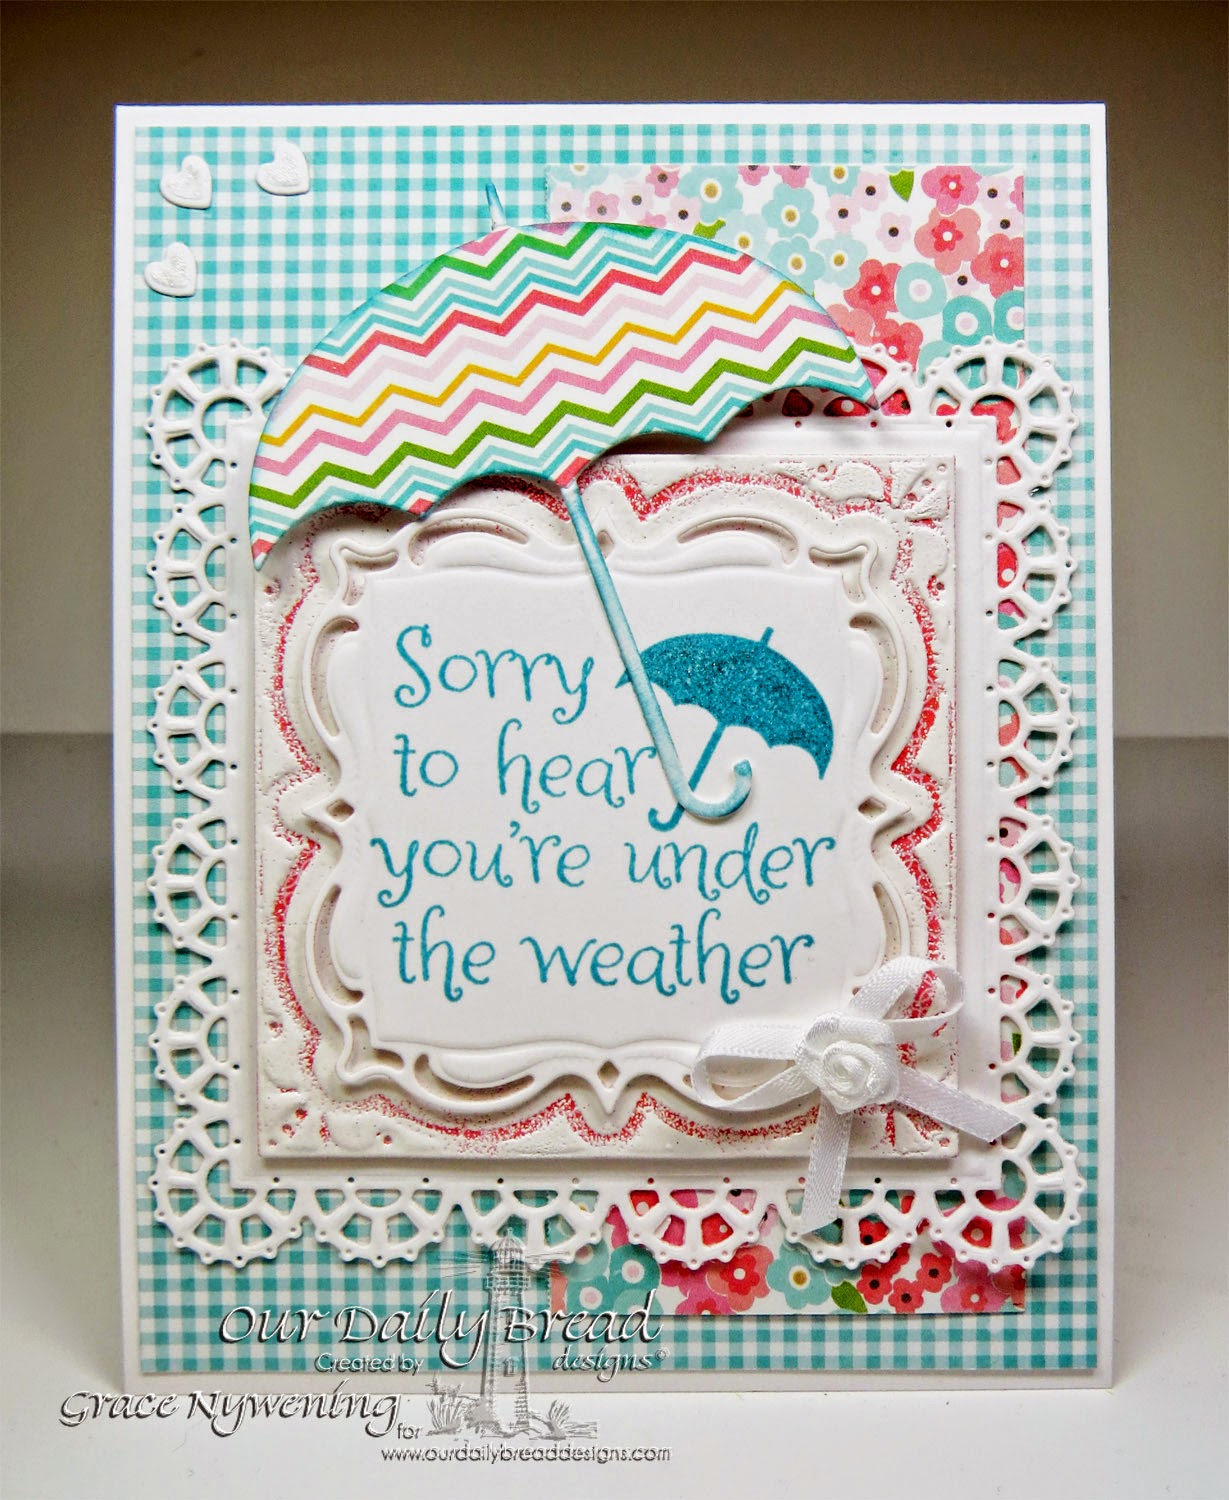 ODBD stamps: April Showers, Layered Lacey Squares Dies, Umbrella Die, Clouds and Raindrops dies, designed by Grace Nywening